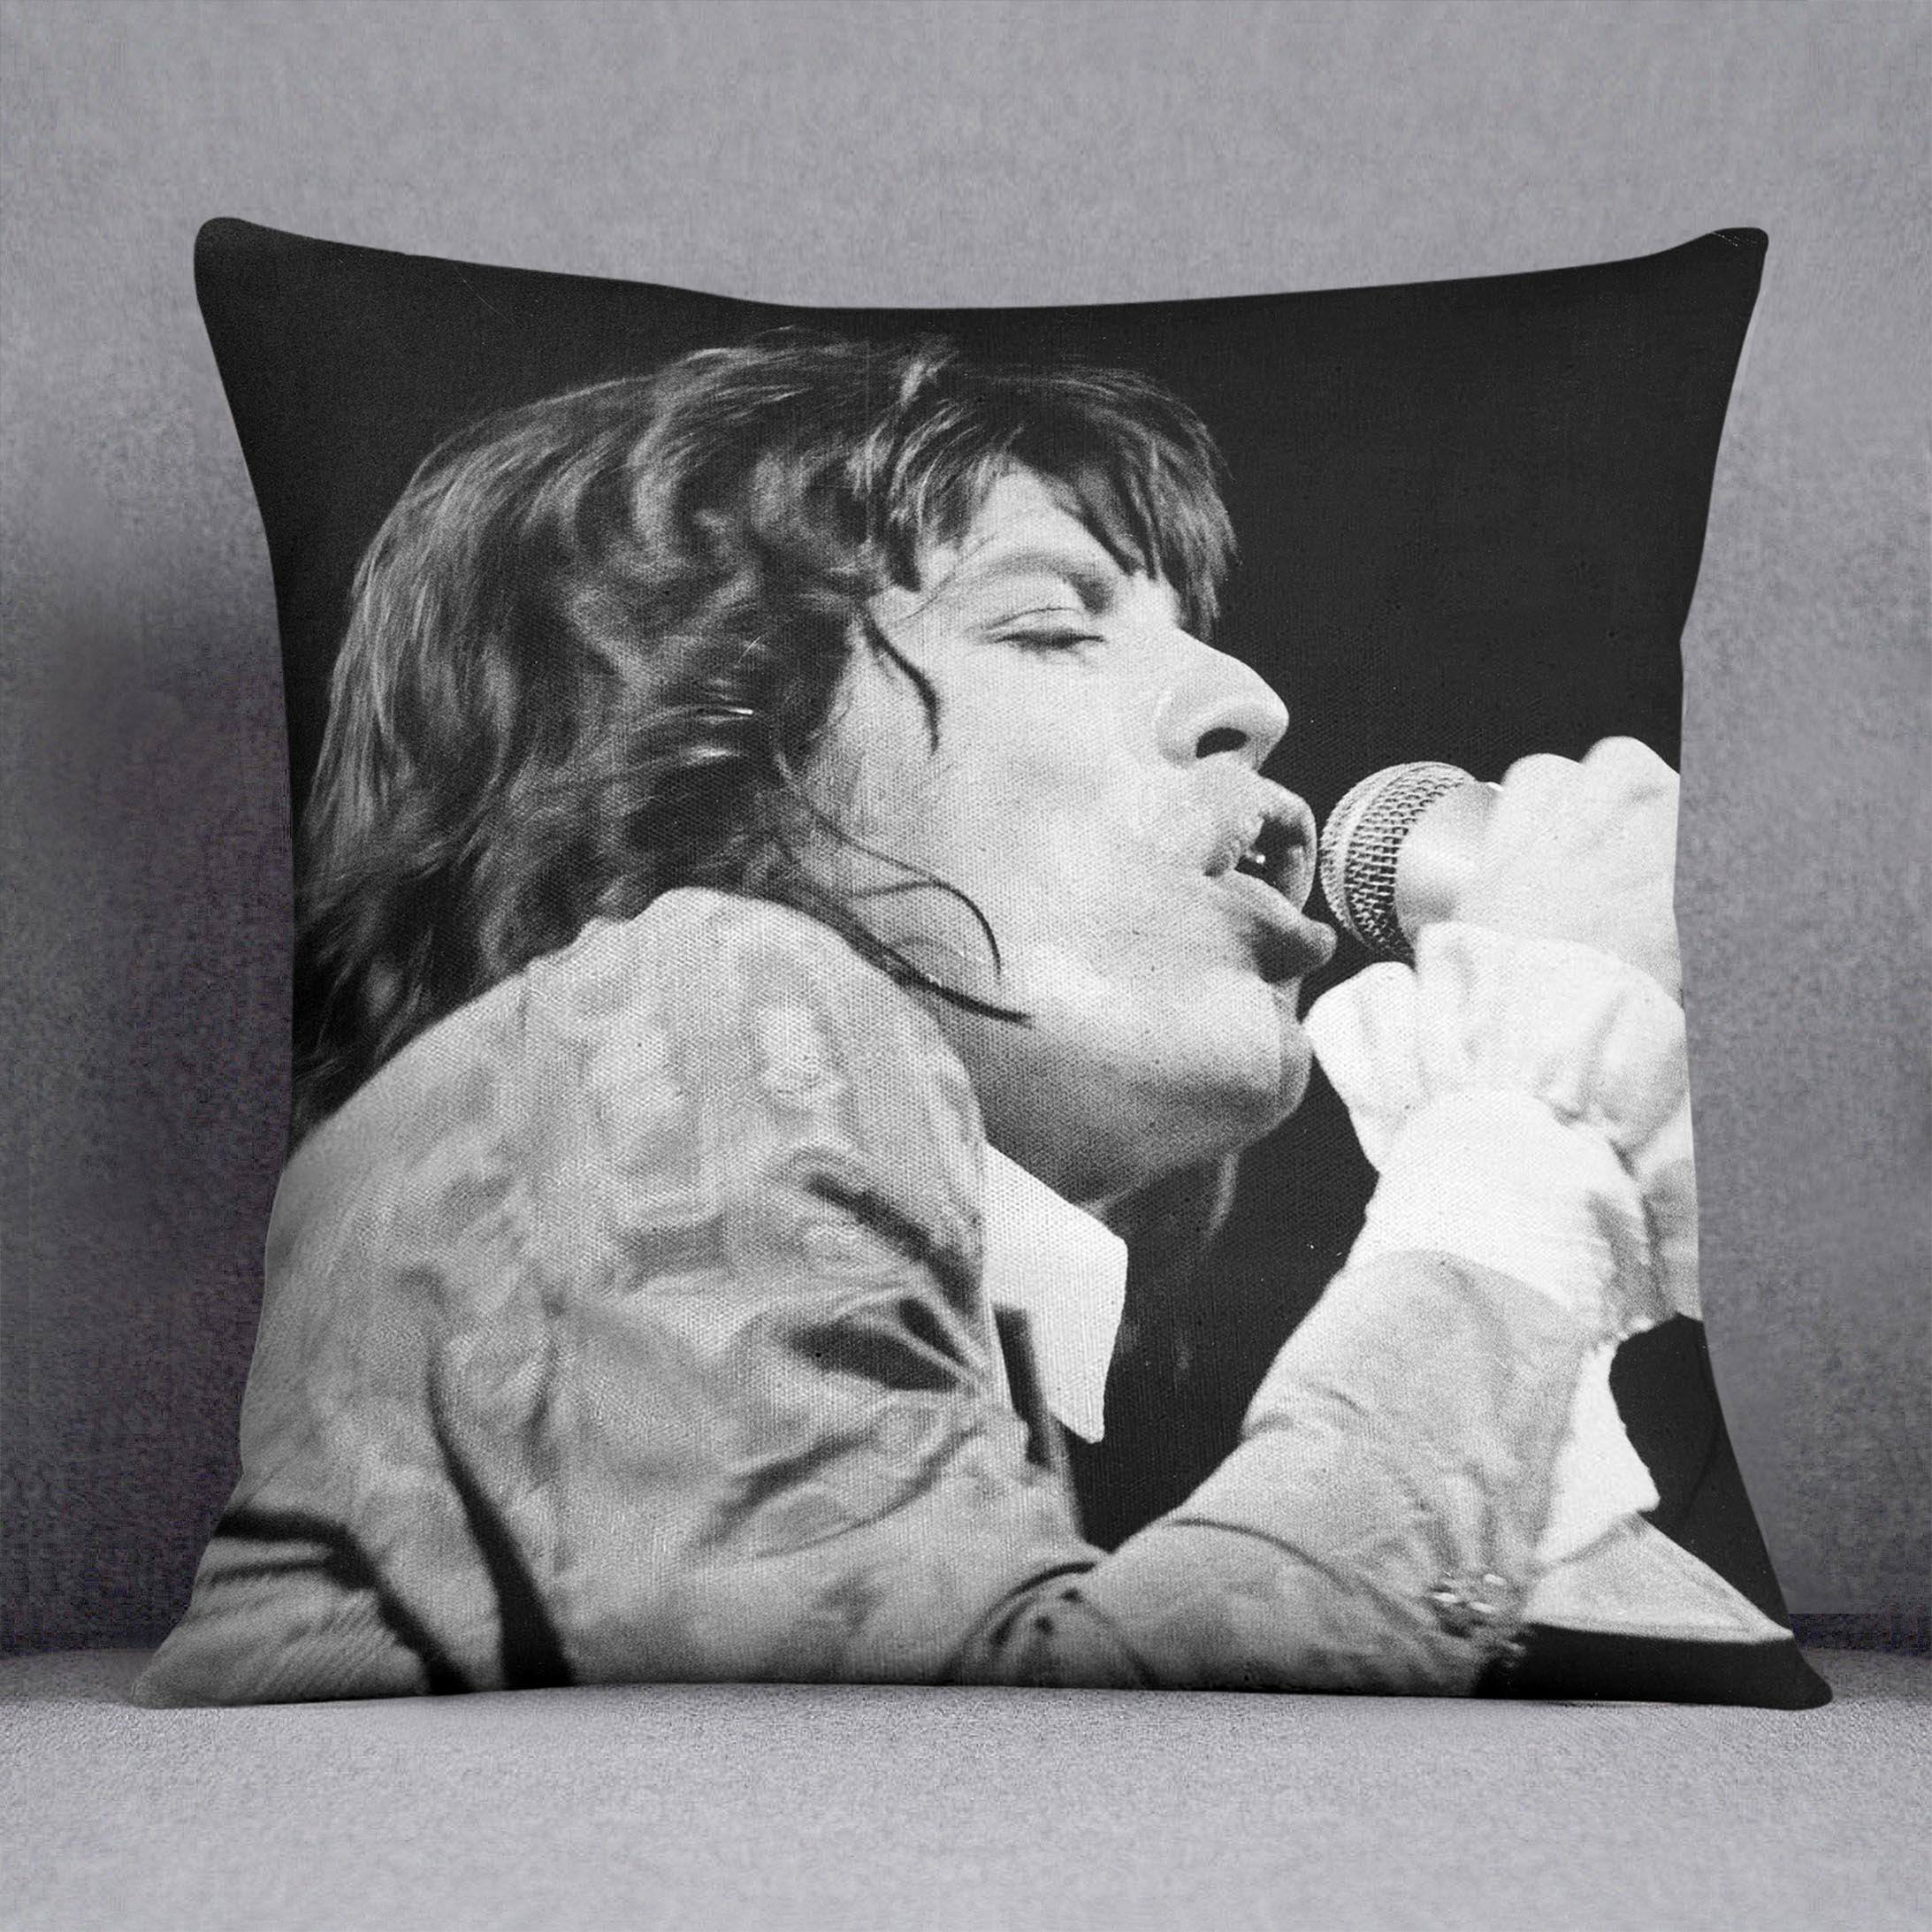 Mick Jagger belts it out Cushion